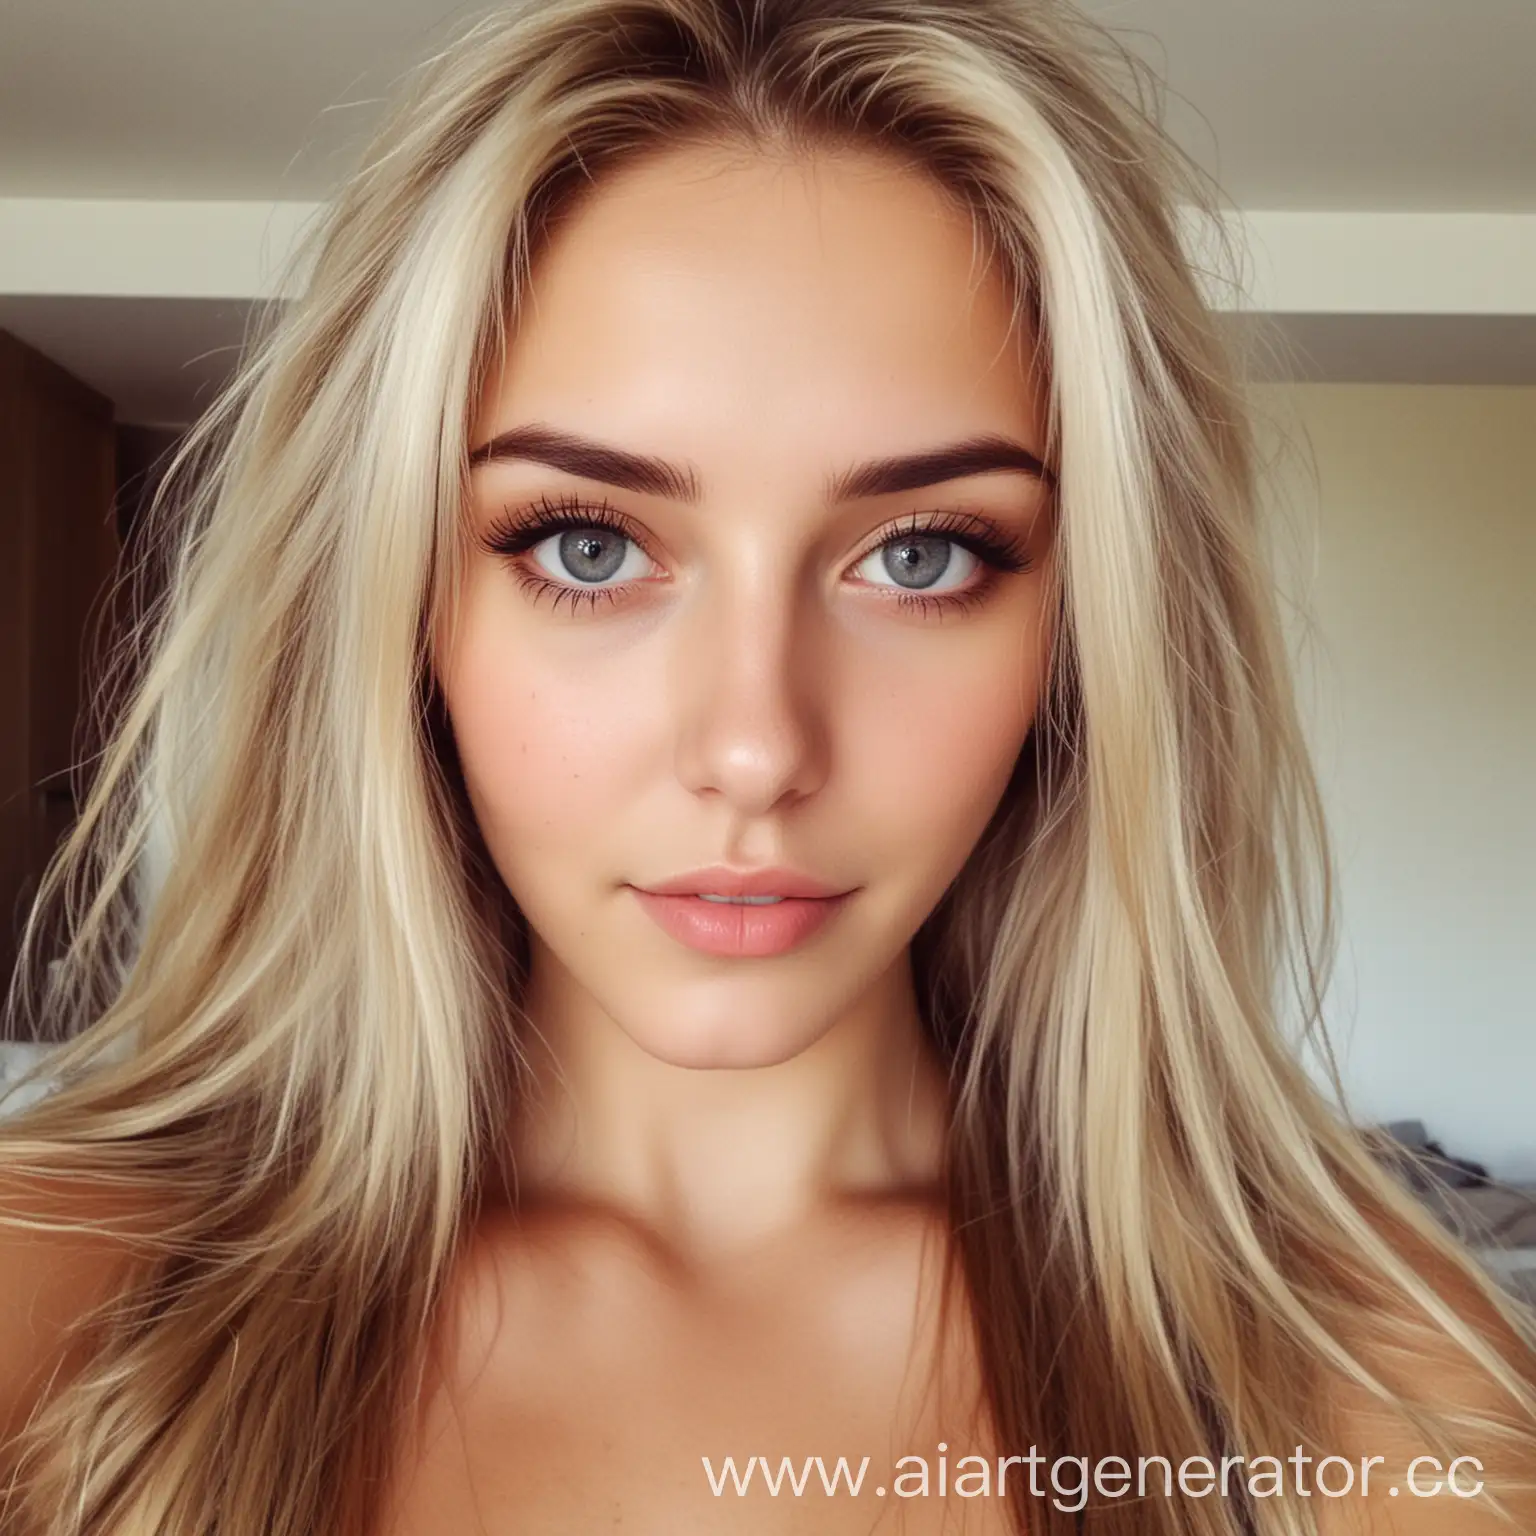 Beautiful-Blonde-Girl-with-Gray-Eyes-Taking-Selfie-at-Home